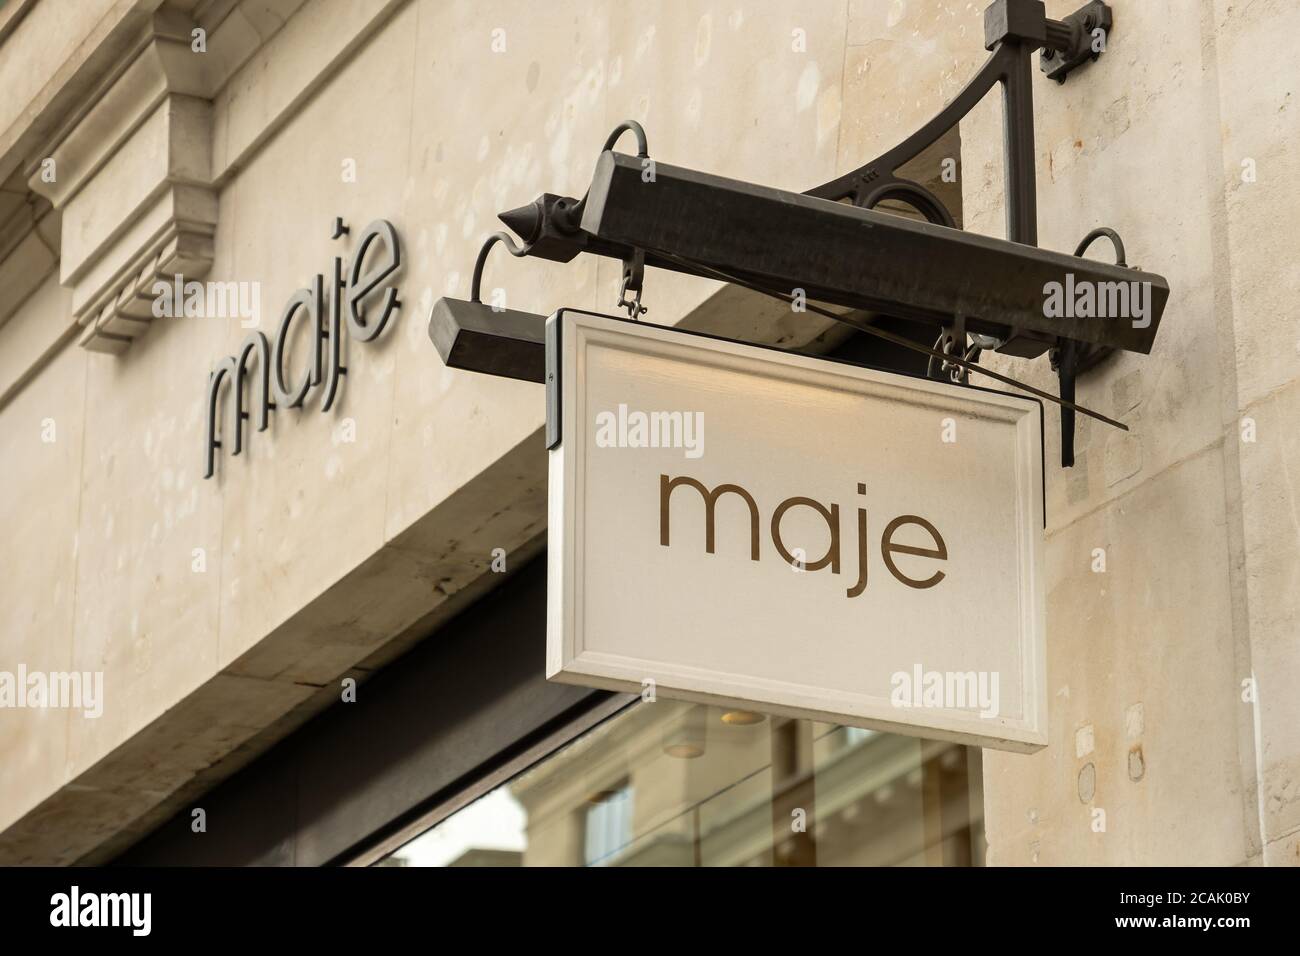 London- Maje retail store signage in London's West End Stock Photo - Alamy